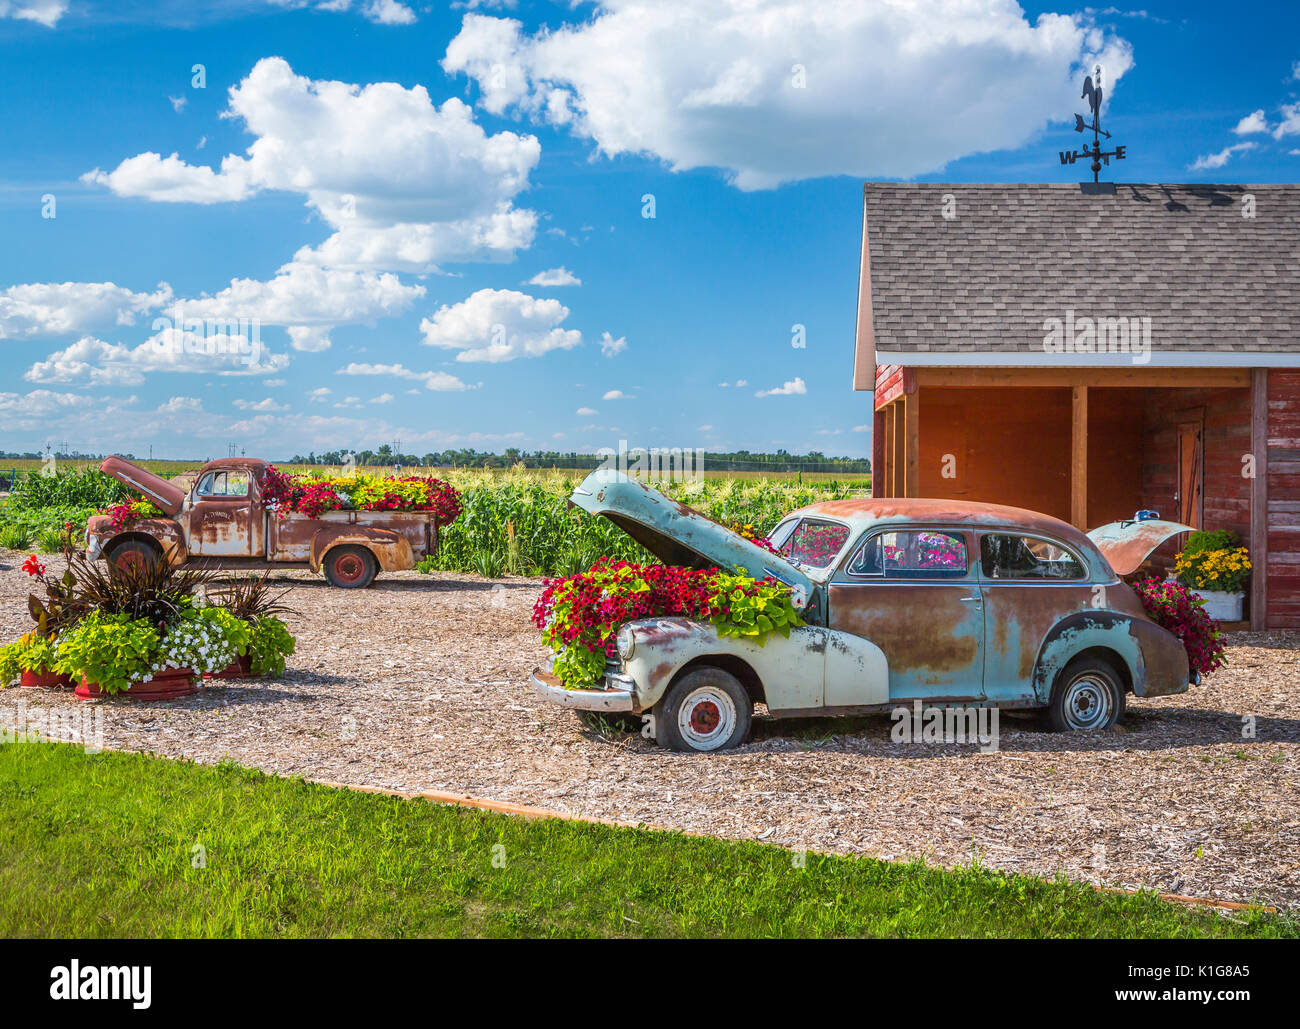 The Winkler Horticulture Society exhibit, Parkside Pioneer Patch at Winkler, Manitoba. Canada. Stock Photo